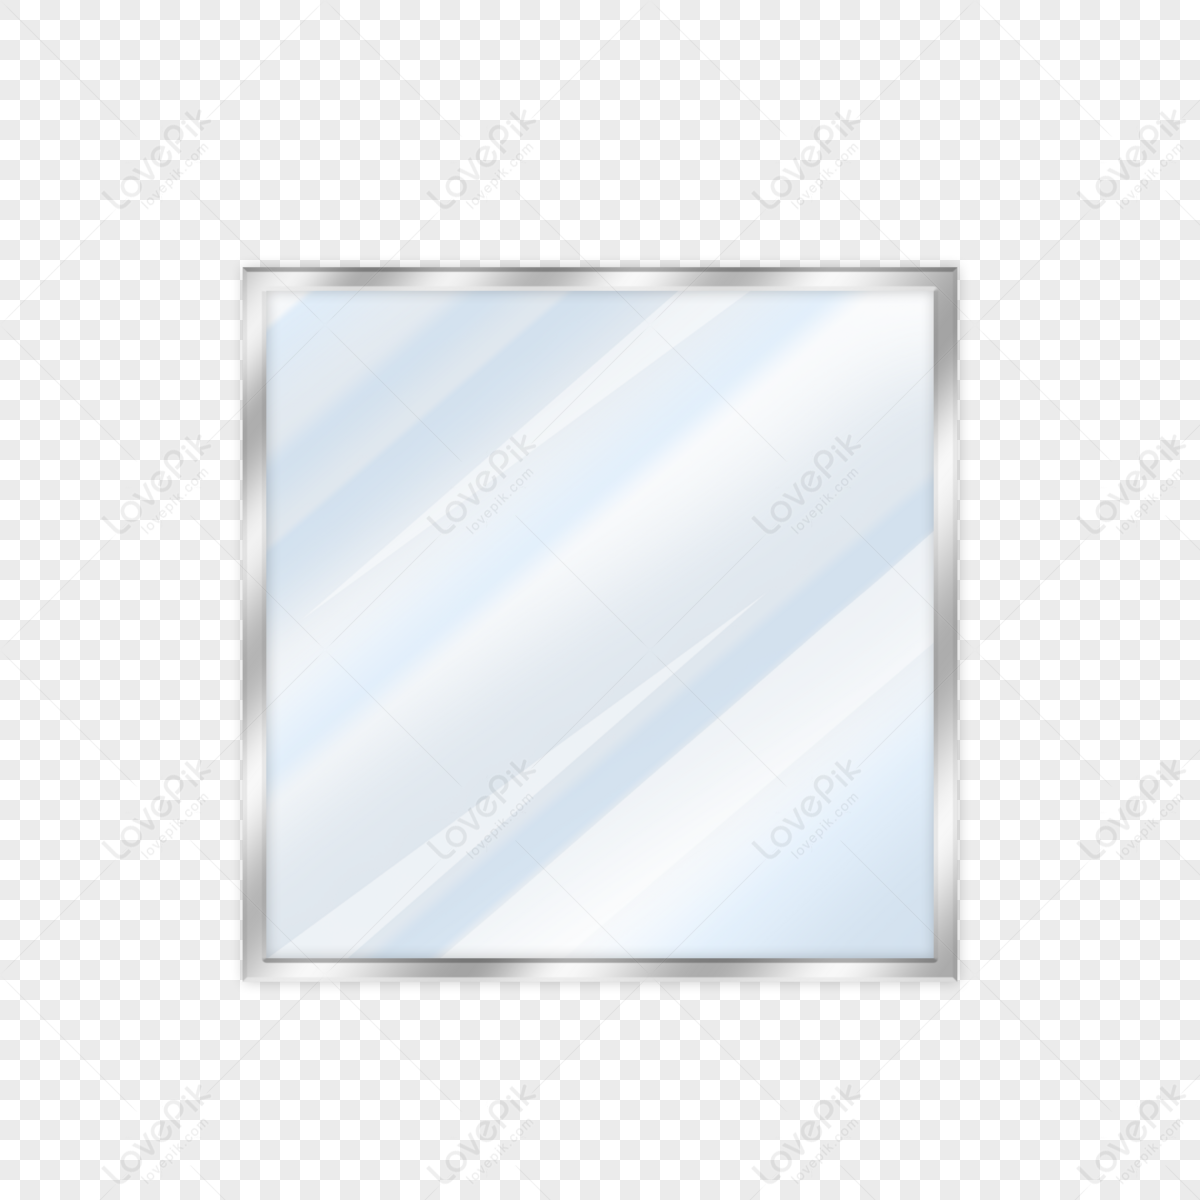 Reflective Stickers PNG Transparent Images Free Download